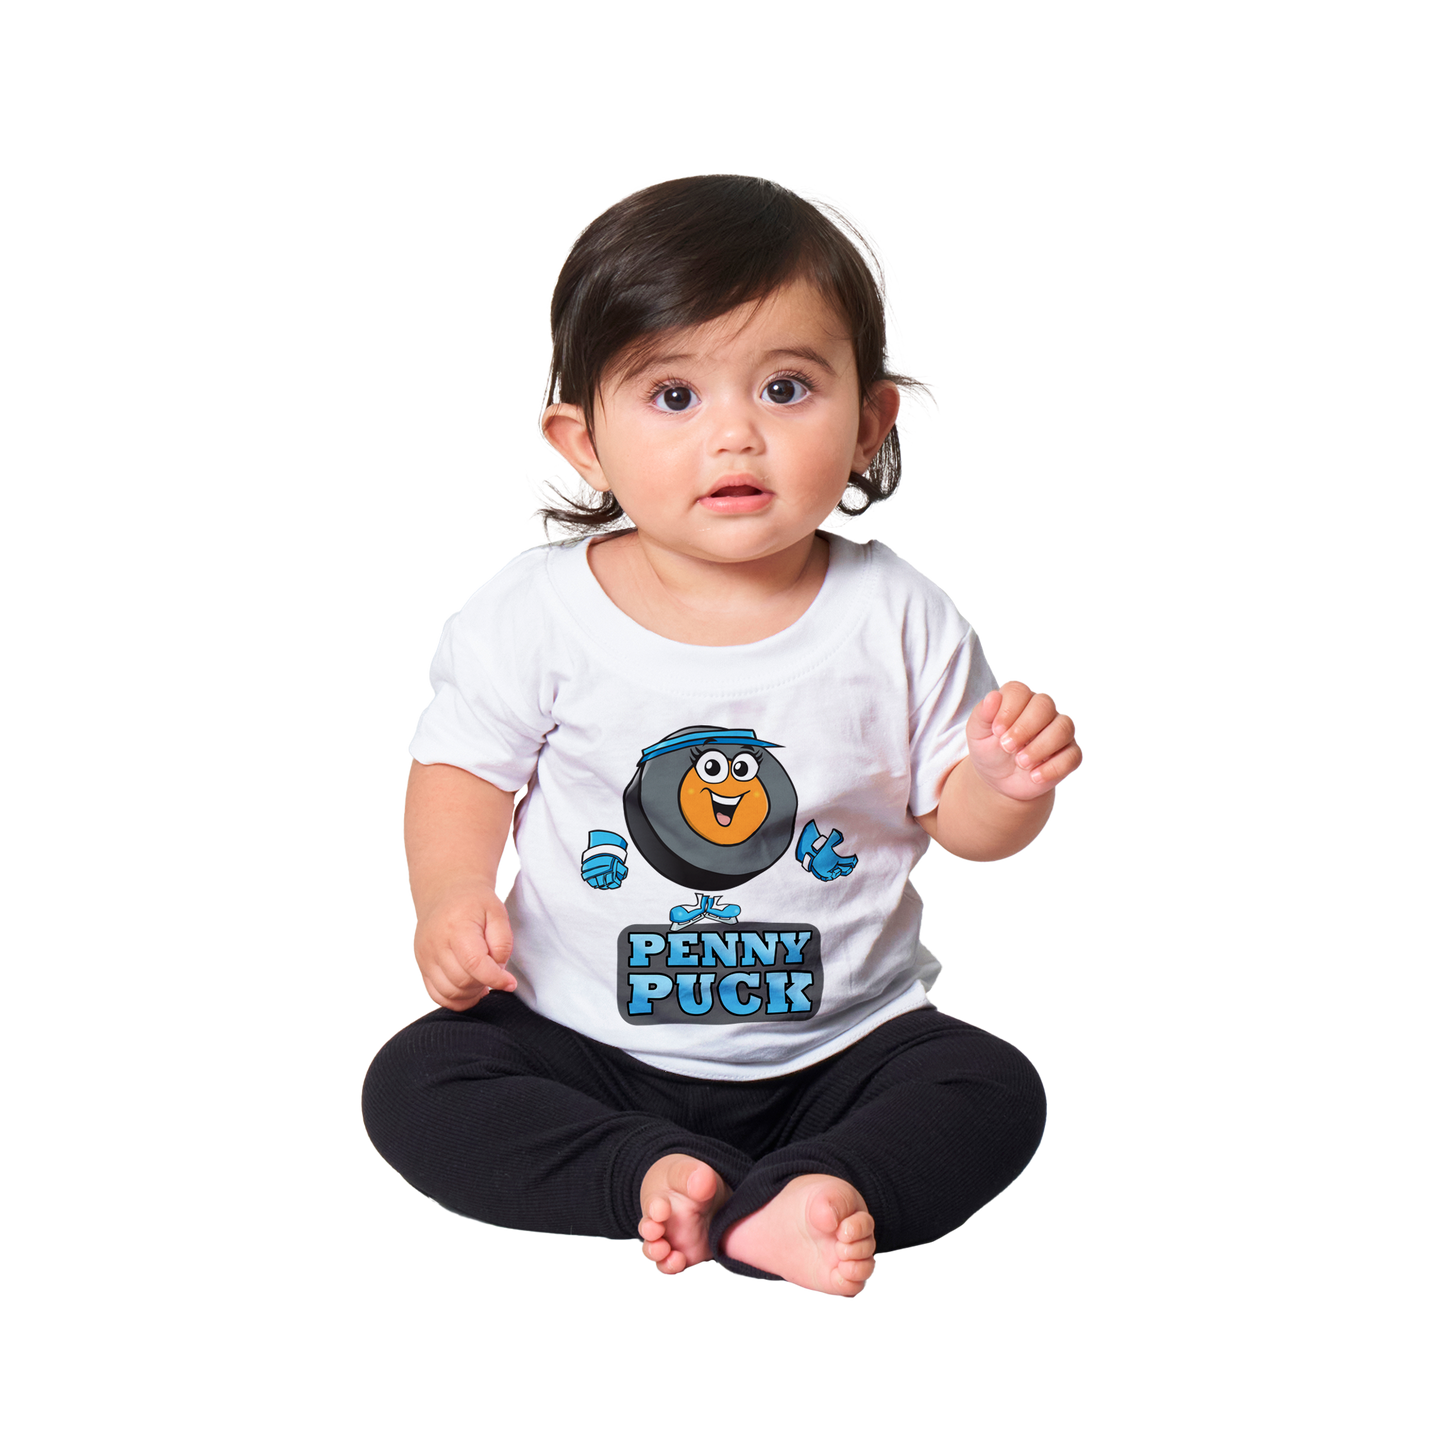 Hey Penny Puck Classic Baby Crewneck T-shirt